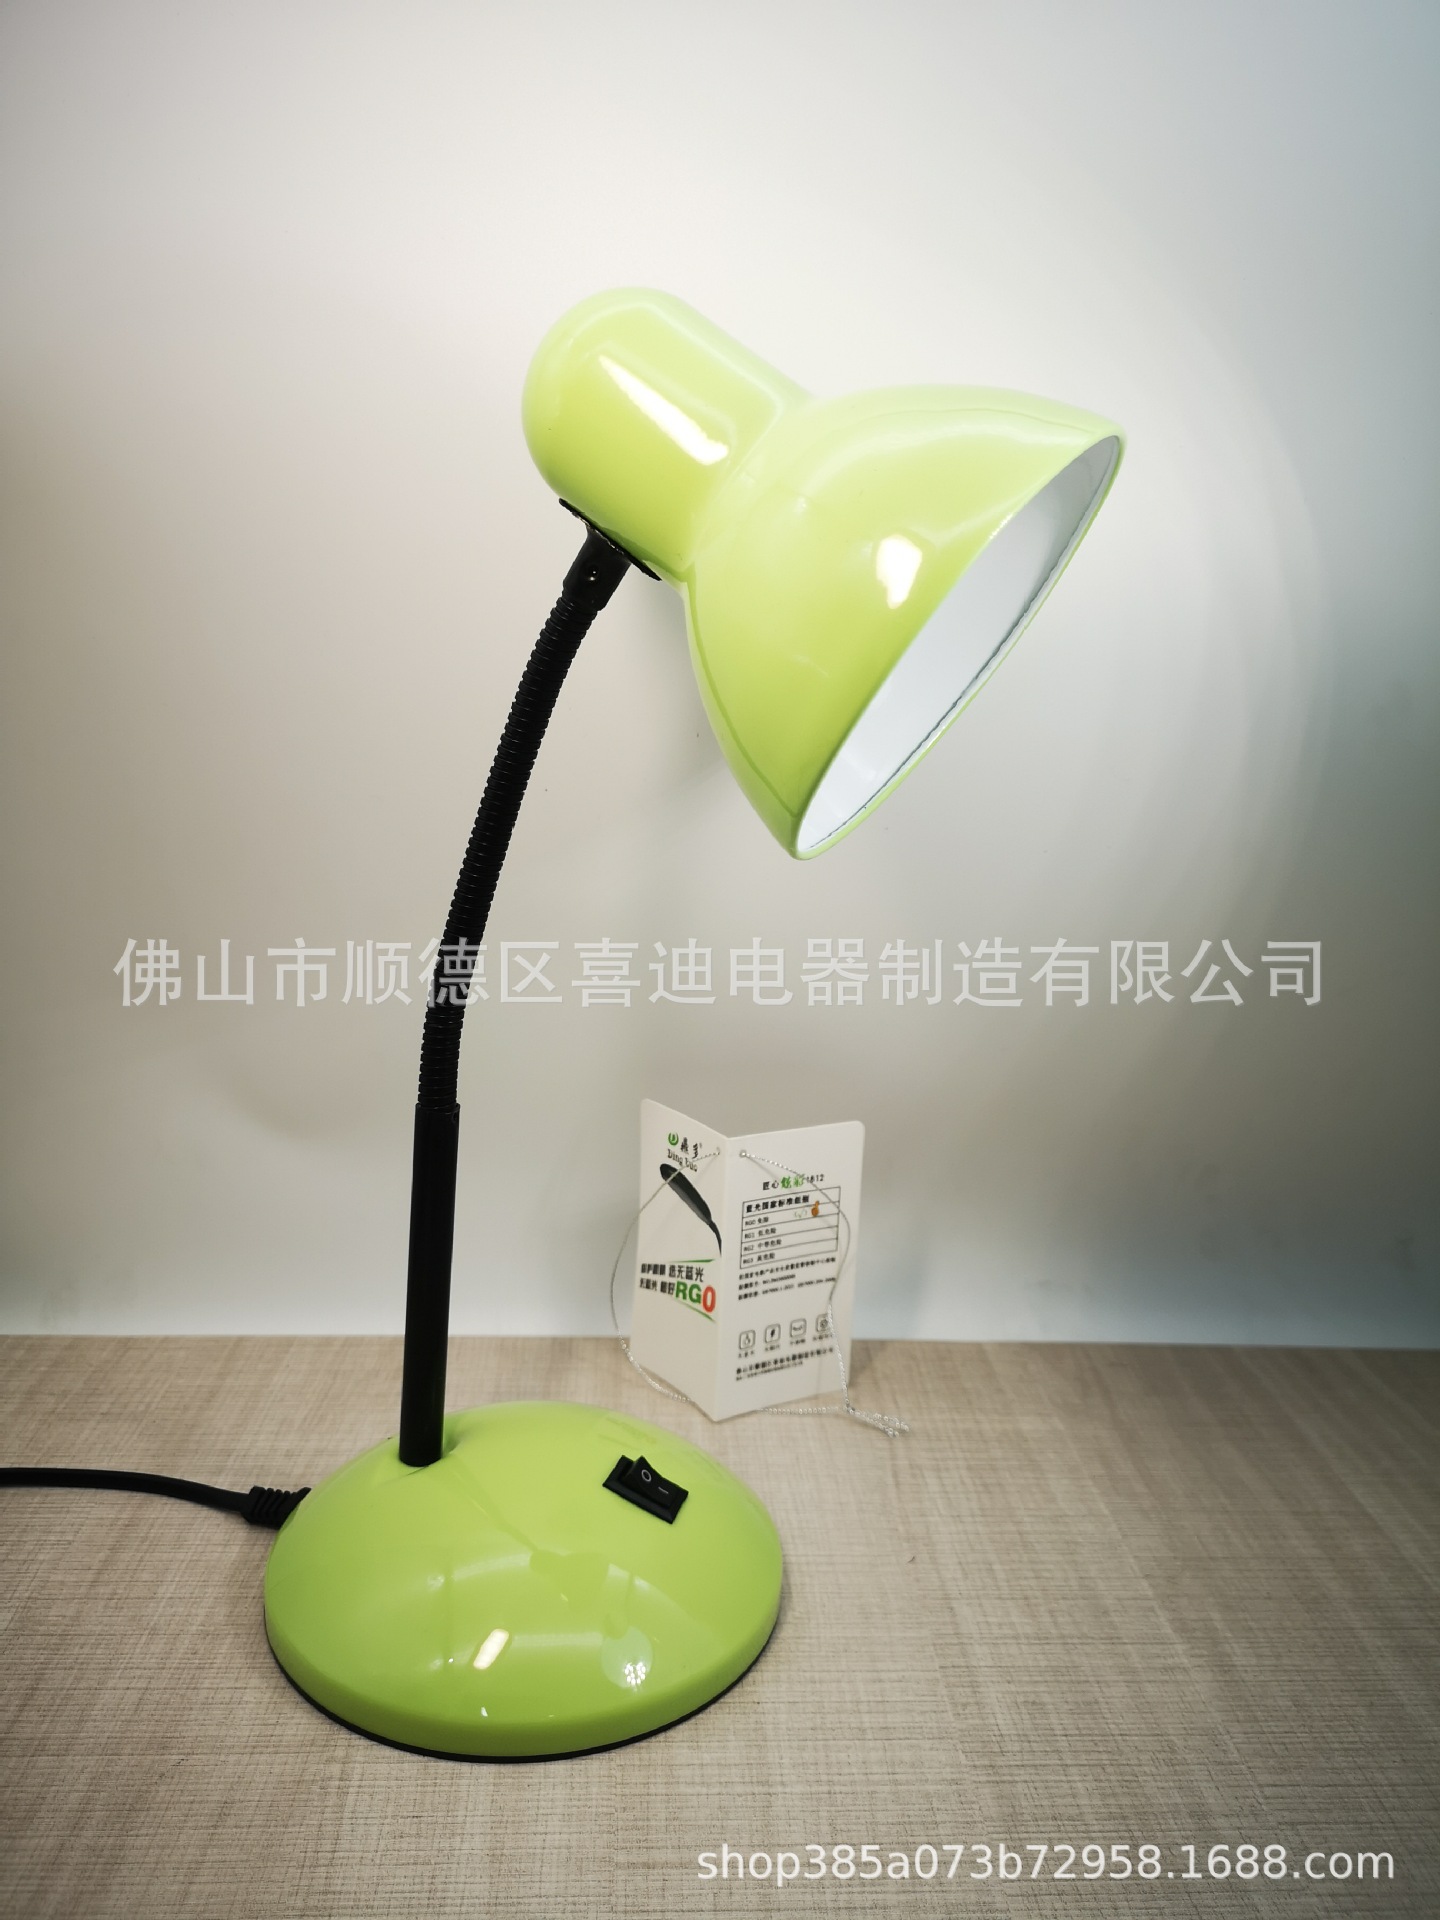 Factory Direct Supply Household Lighting Reading Eye-Protection Lamp Simple Fashion Led Table Lamp 1811 Small Night Lamp